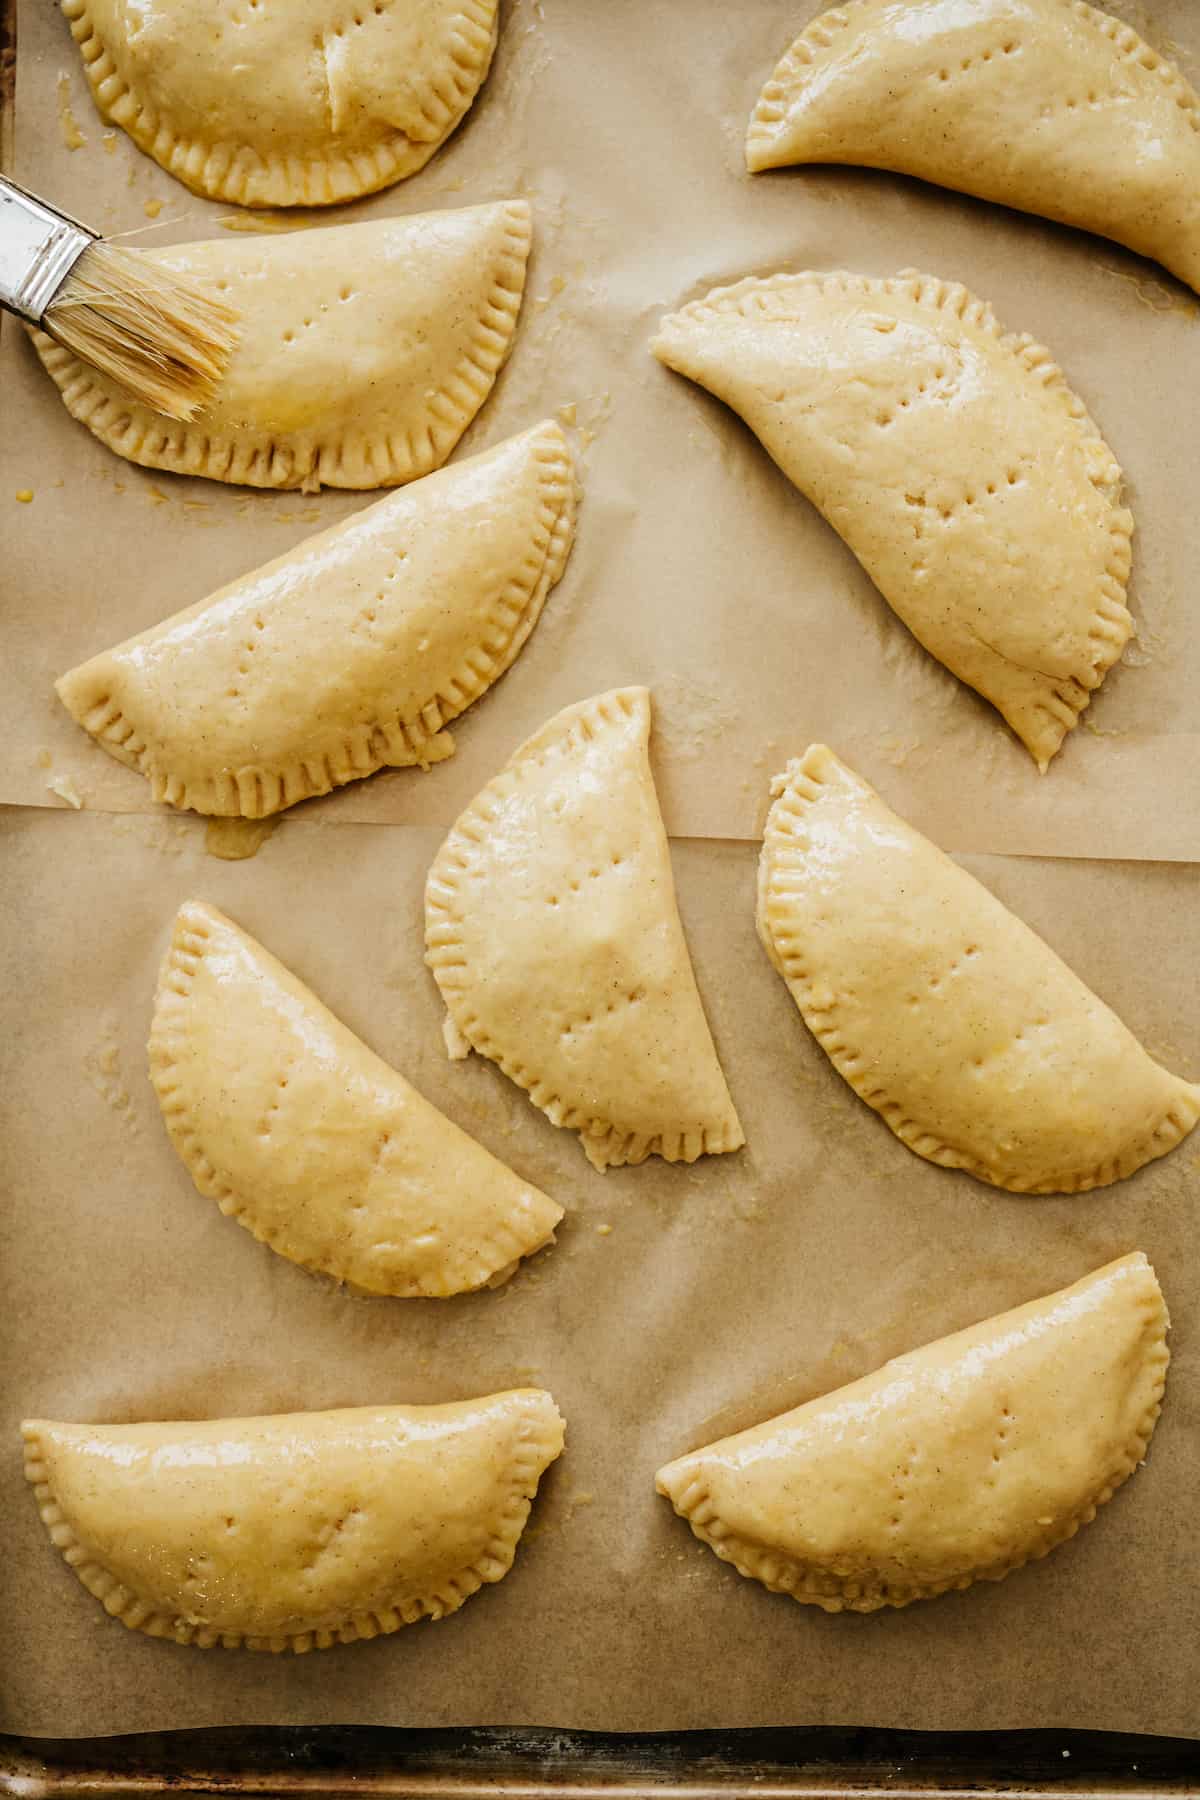 brushing crimped and fork-poked assembled empanadas with an egg wash before baking.